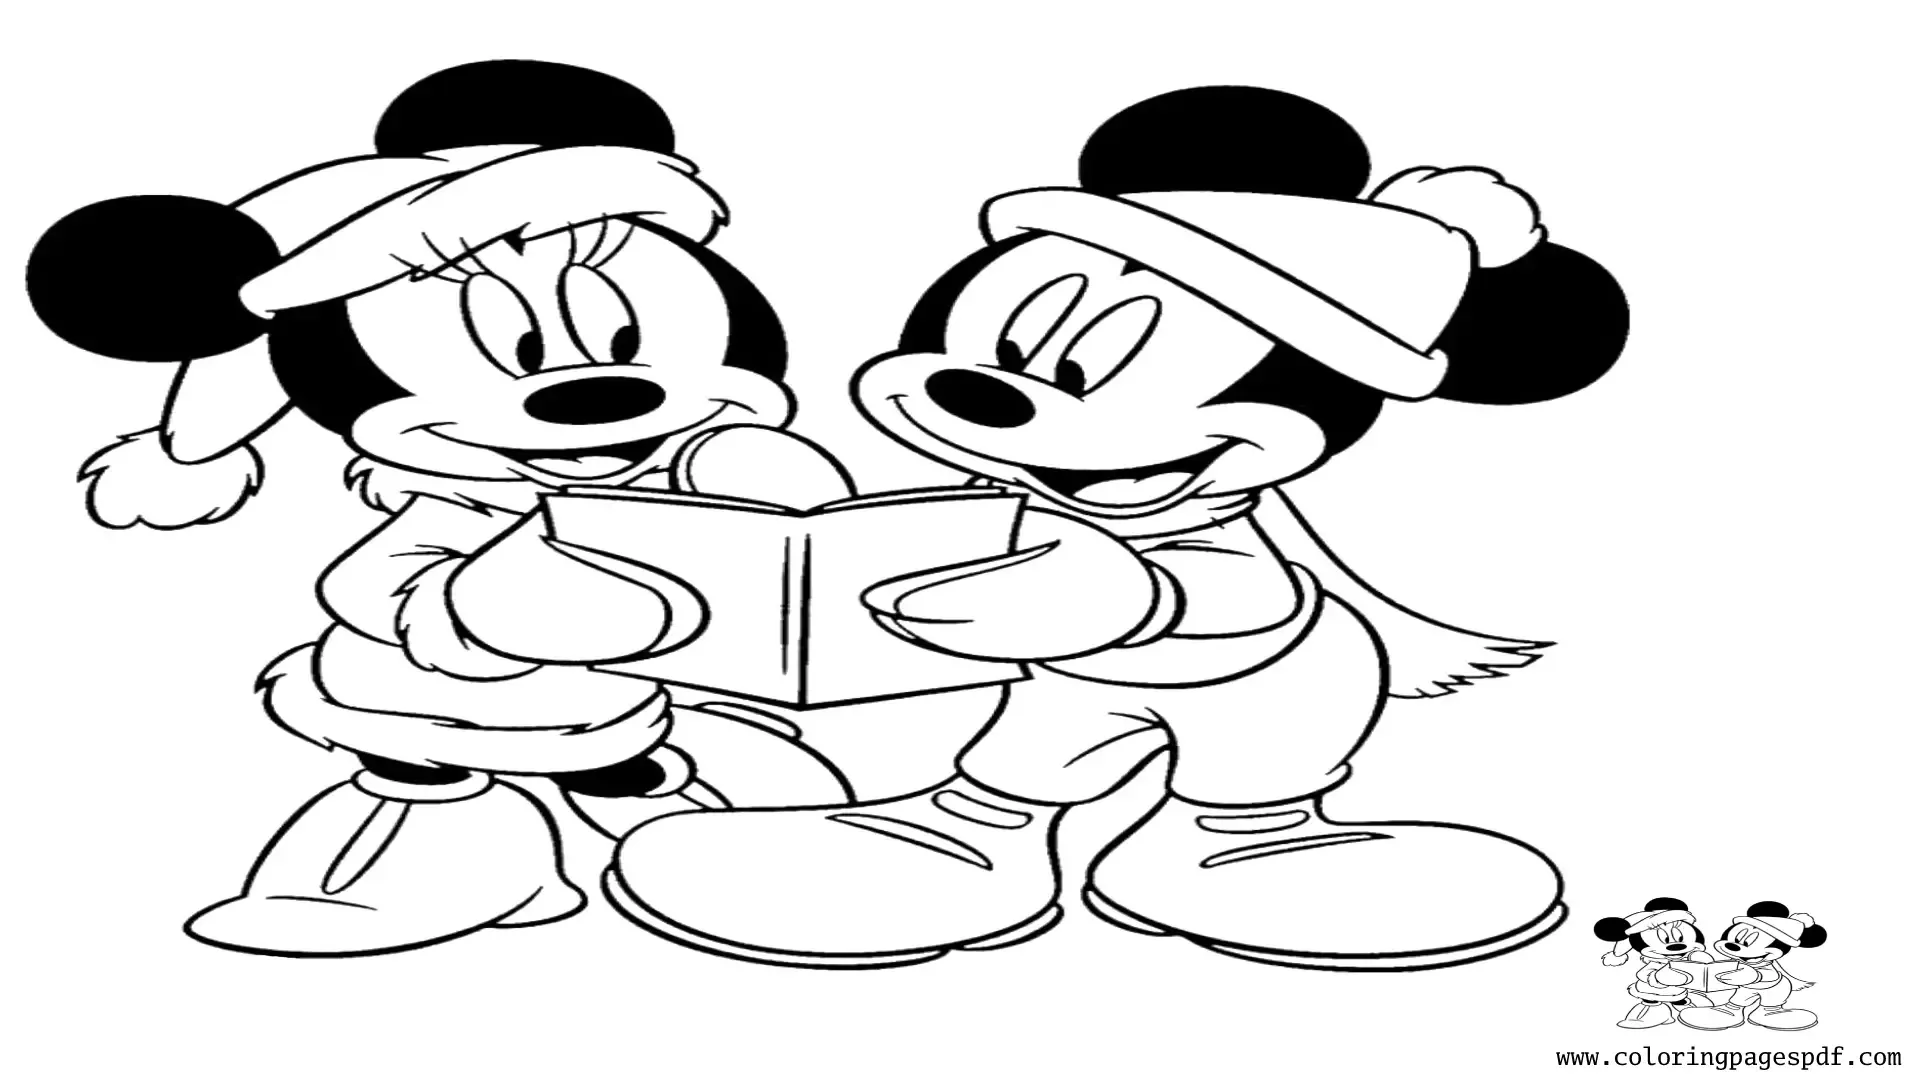 Coloring Page Of Mickey And Minnie Mouse Reading A Book